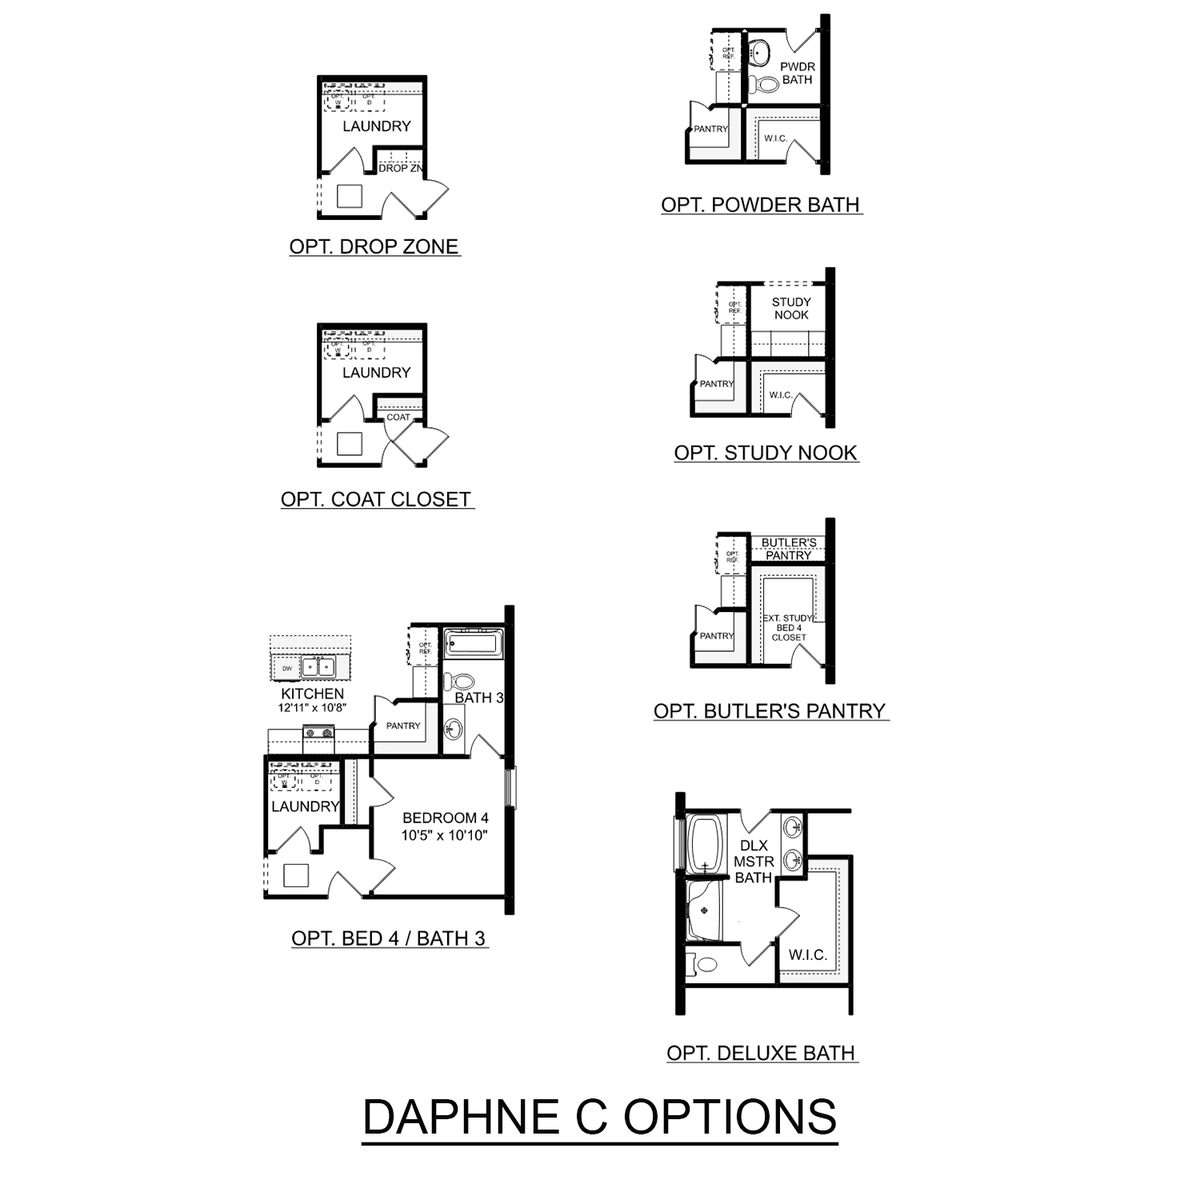 2 - The Daphne C buildable floor plan layout in Davidson Homes' Spragins Cove community.